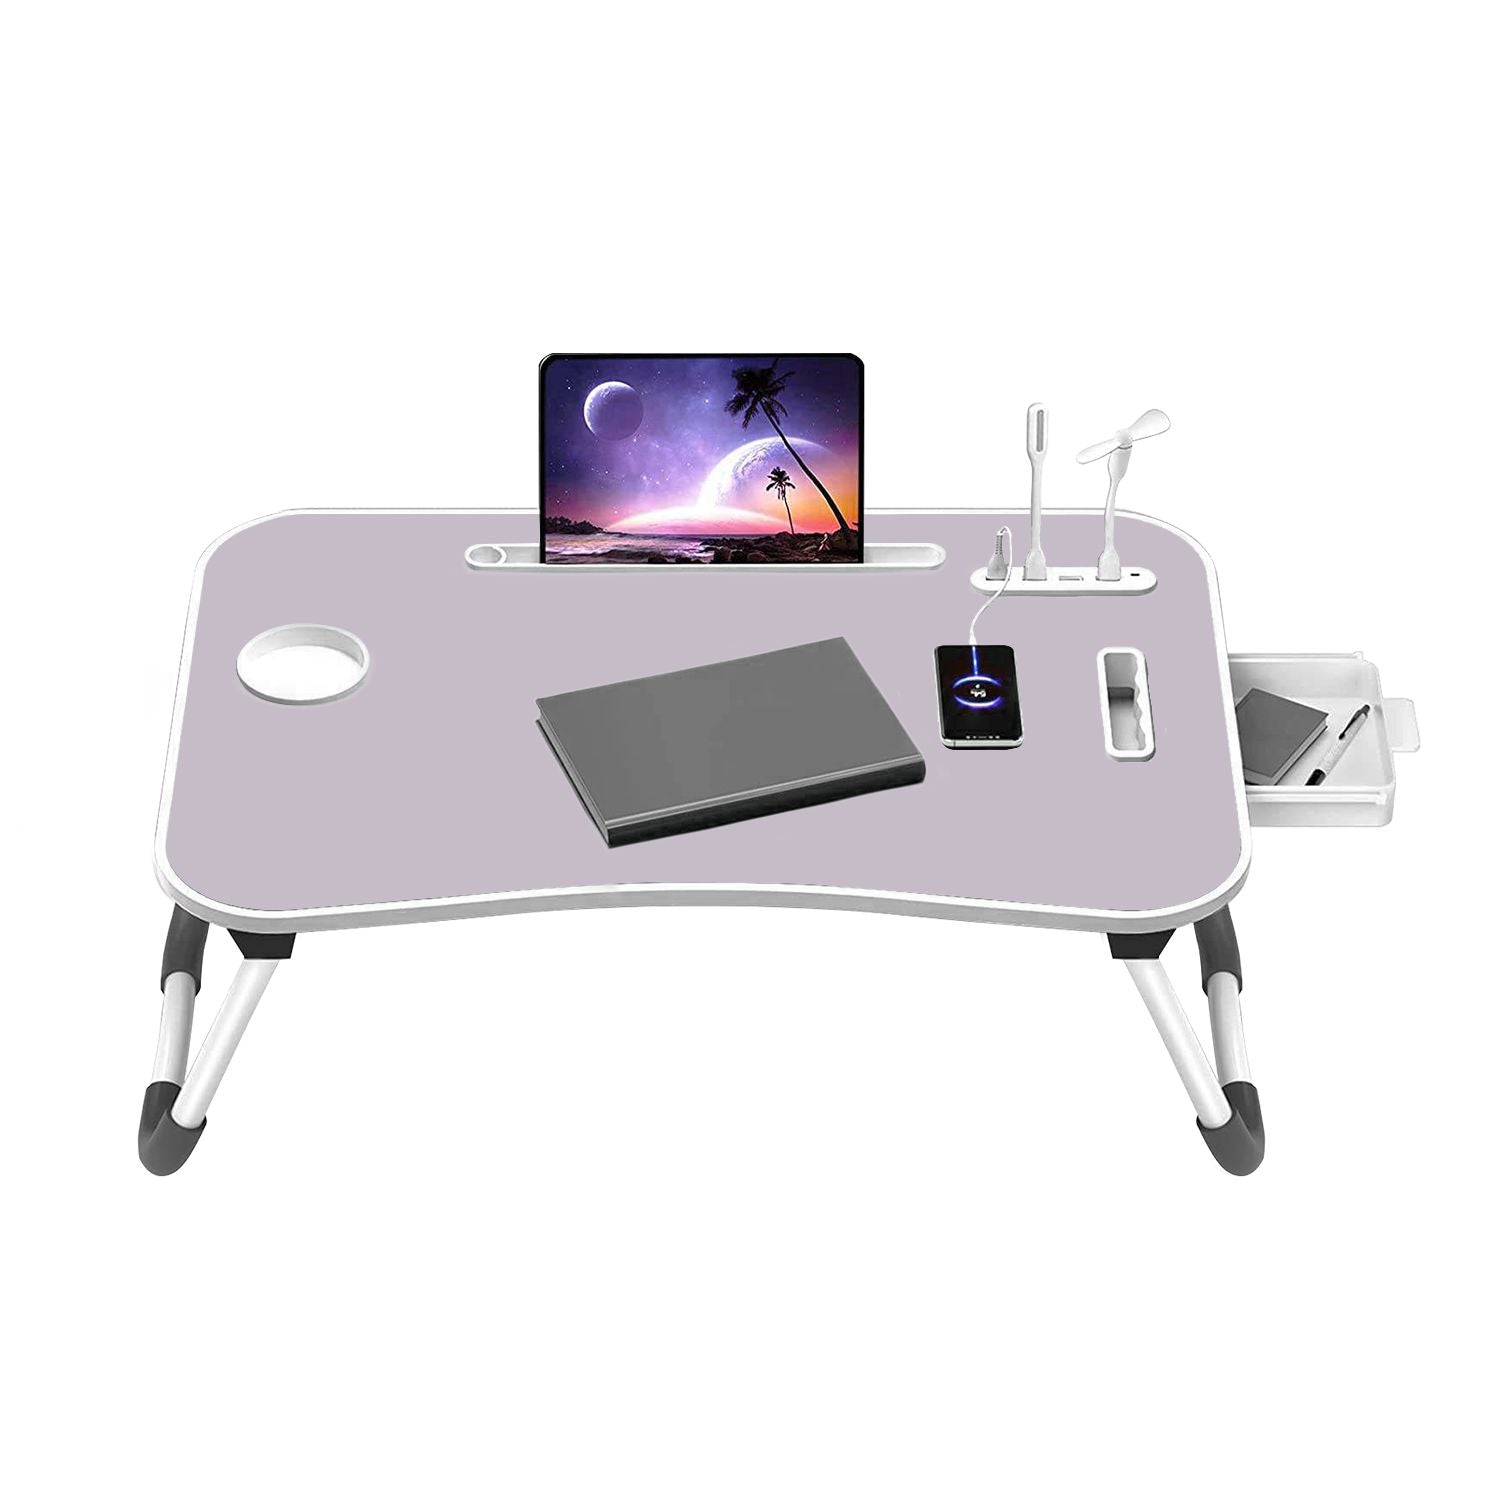 Ekkio Portable Laptop Bed Desk Foldable Legs with USB Charge Port Home Office Light Pink